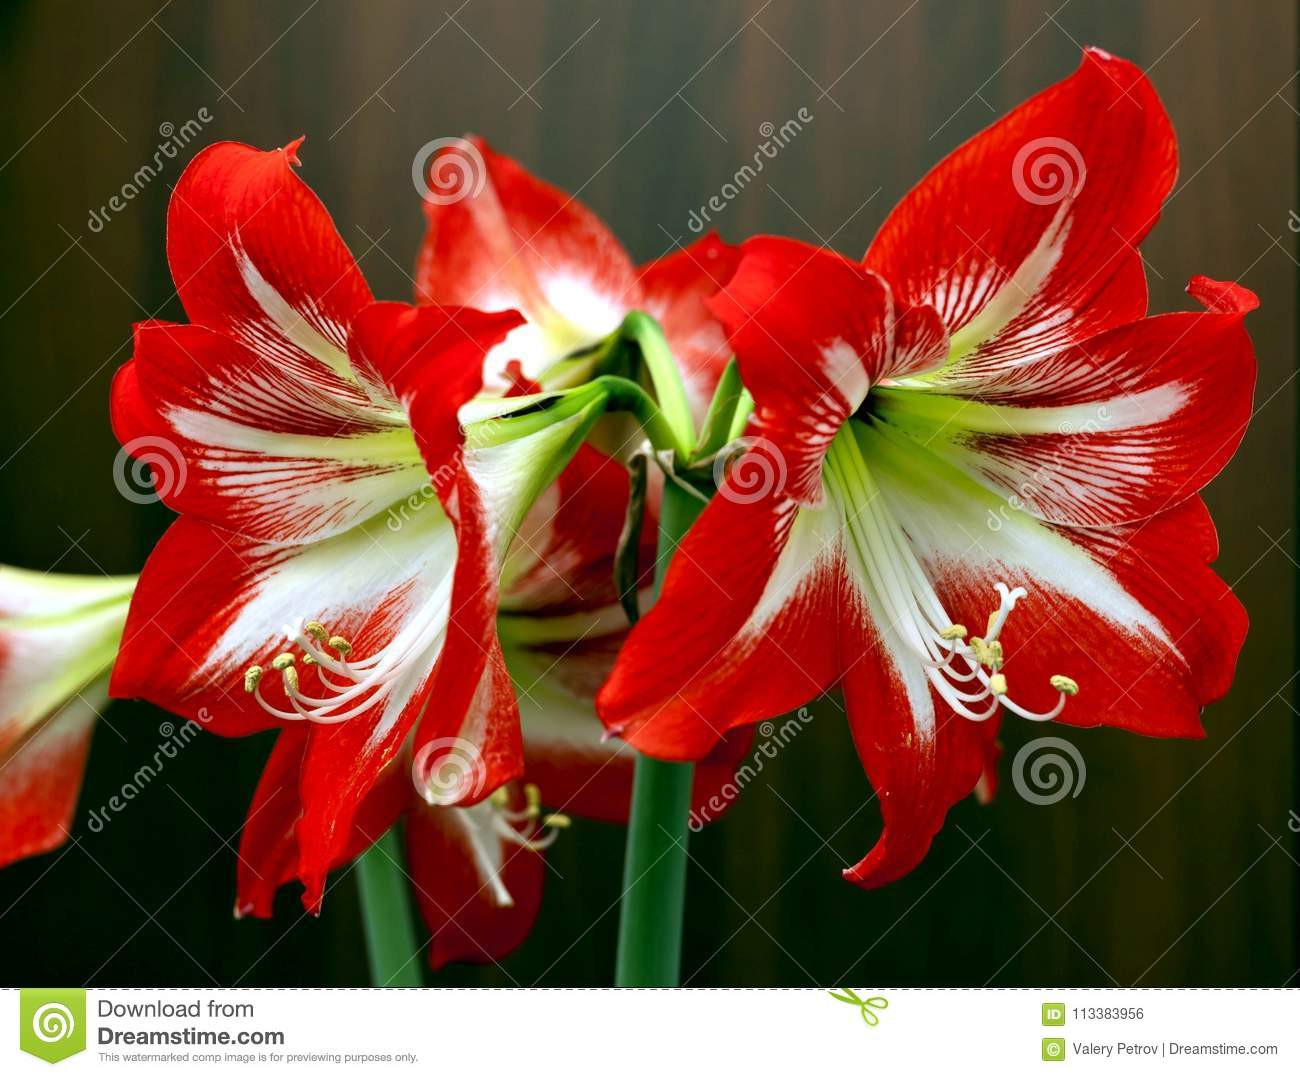 Red Christmas Flower Names
 Bright Red Flowers Amaryllis Stock Image of